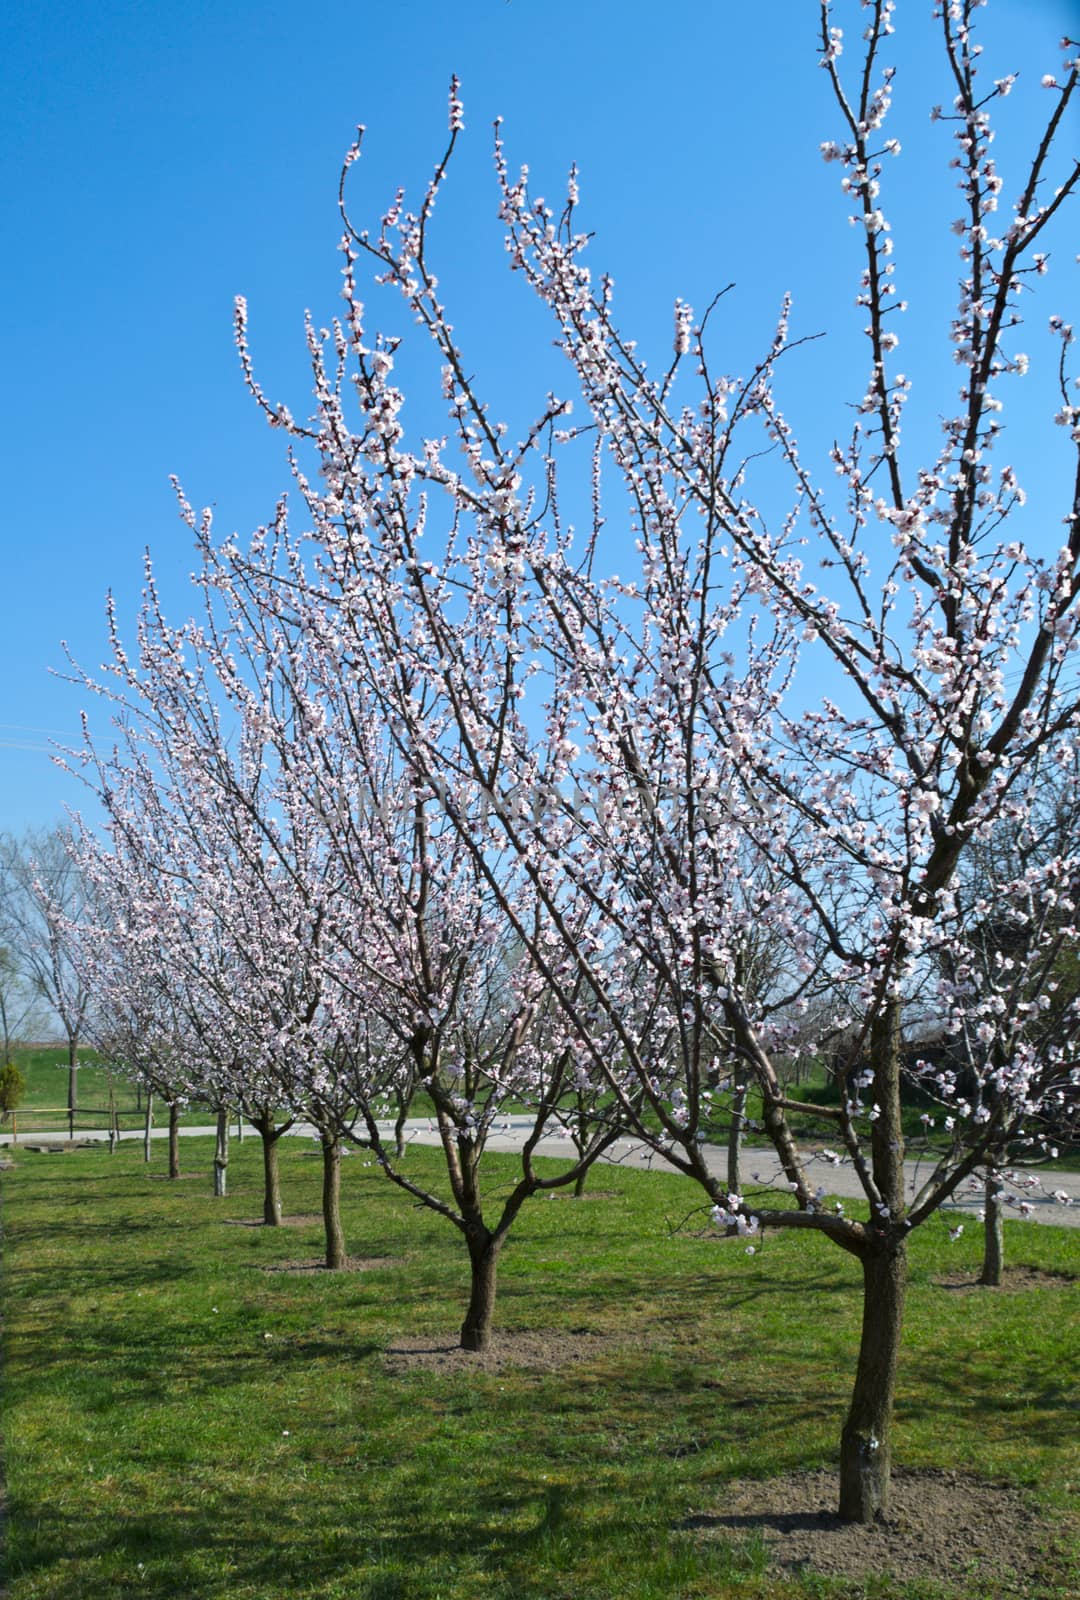 Flowering apricot trees at sprig time by sheriffkule